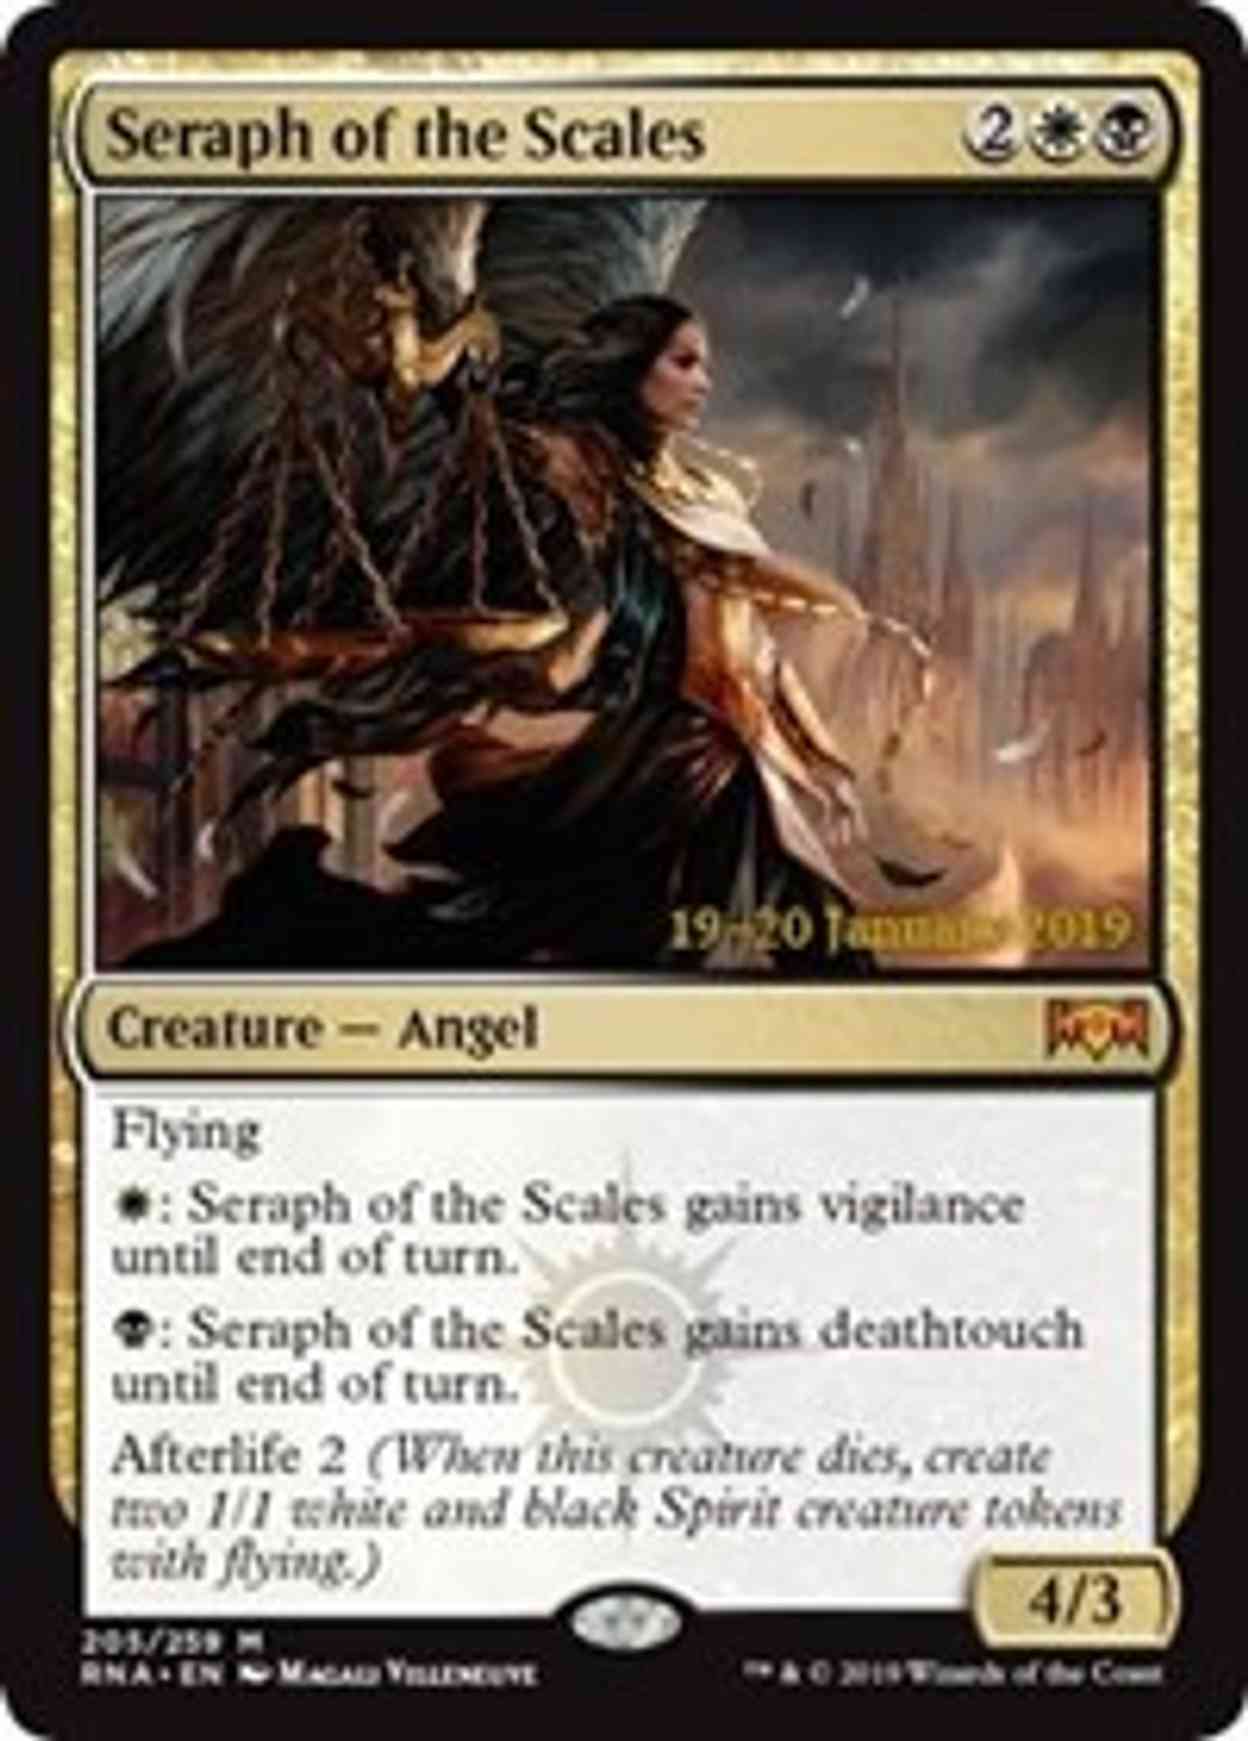 Seraph of the Scales magic card front